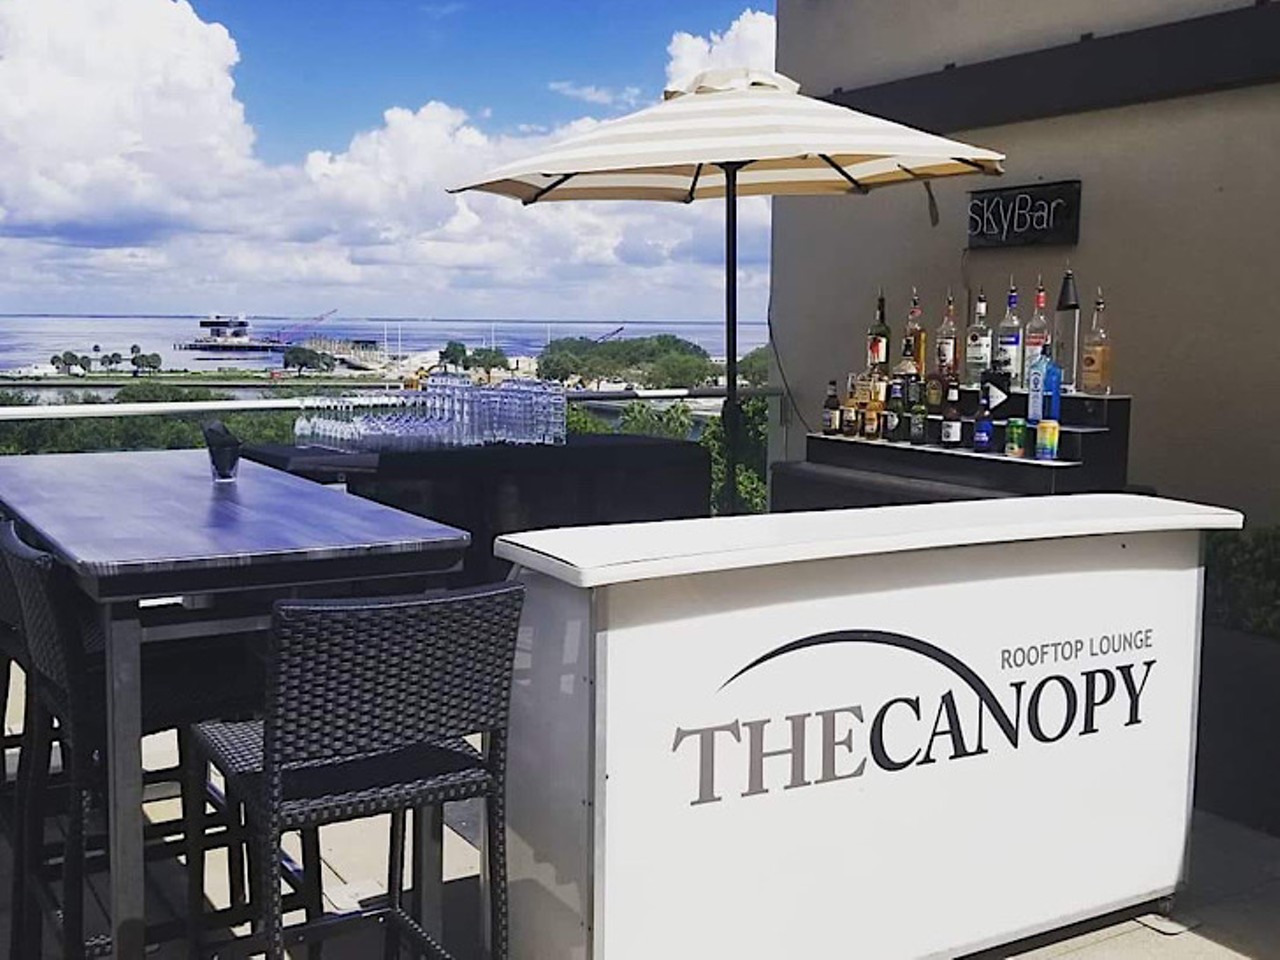 The Canopy
340 Beach Dr NE, St. Petersburg, FL
The Canopy is definitely meant to be saved for when you feel like being your most boujee self. Their menu features some surprisingly basic bar fare, including wings and cheesy tots that are both moderately priced. Their rooftop bar is also worth checking out for a decent view of Downtown St. Pete. 
Photo via The Canopy/Facebook